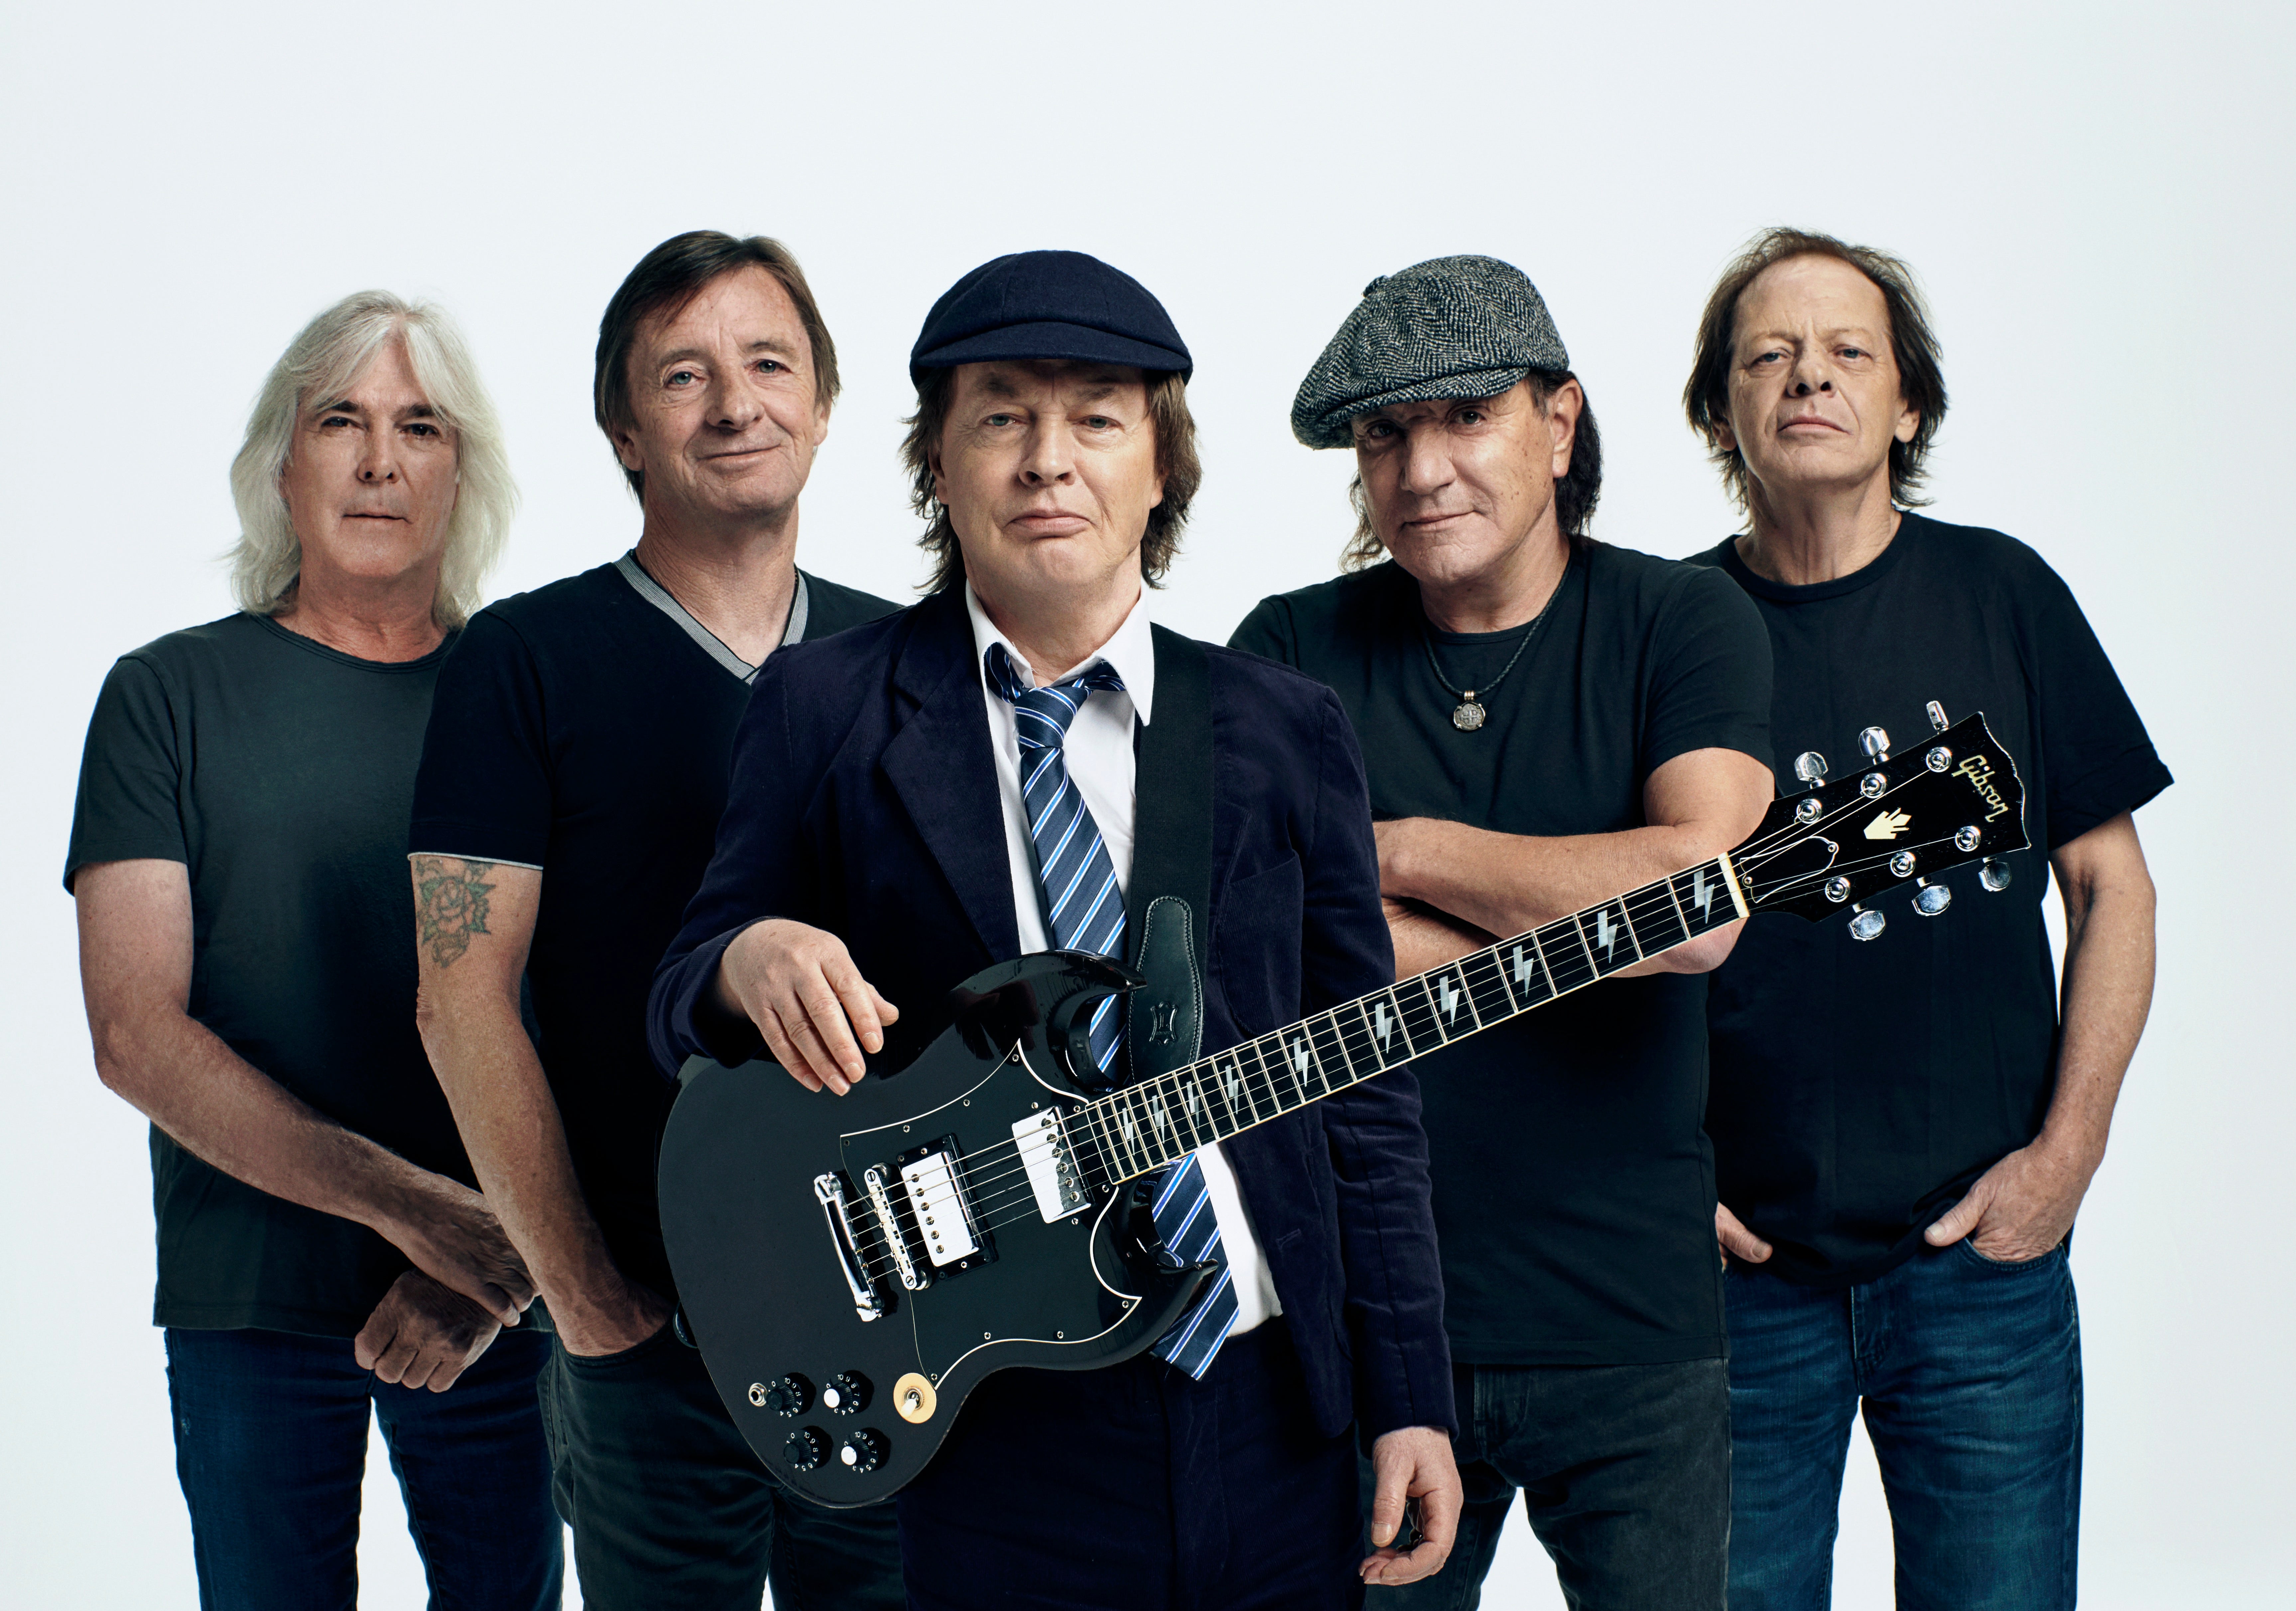 ‘It’s not just a band, it’s family’ – (from left) Cliff Williams, Phil Rudd, Angus Young, Brian Johnson and Stevie Young